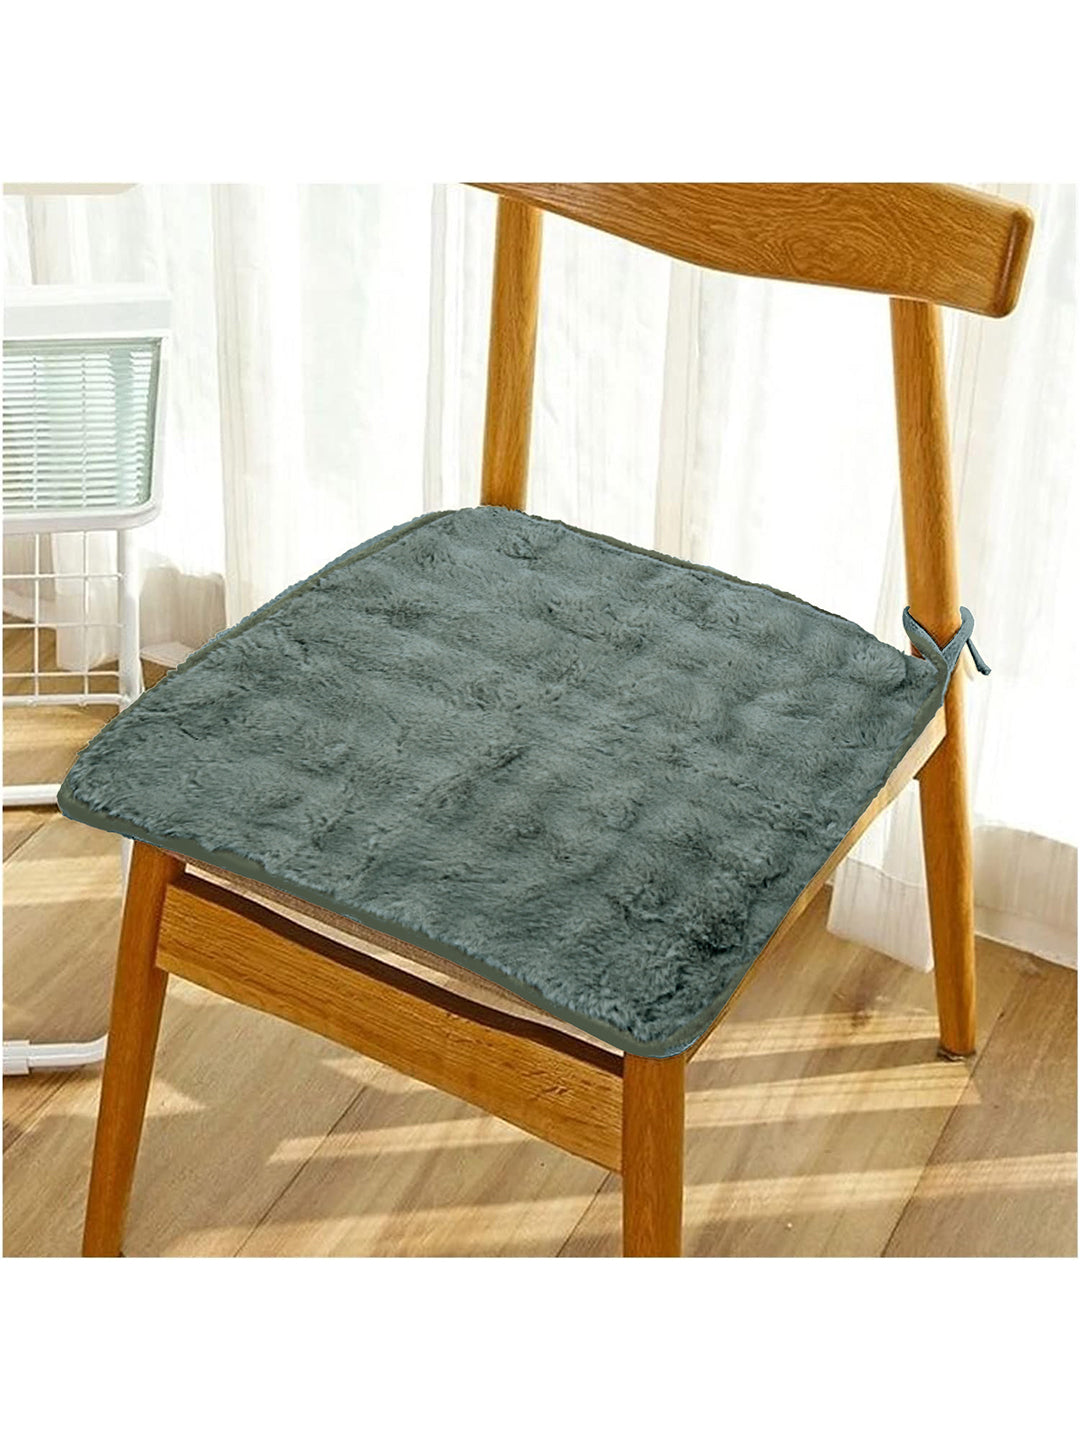 Pack of 6 Protective Premium Fur Chair Pad Cover- Grey